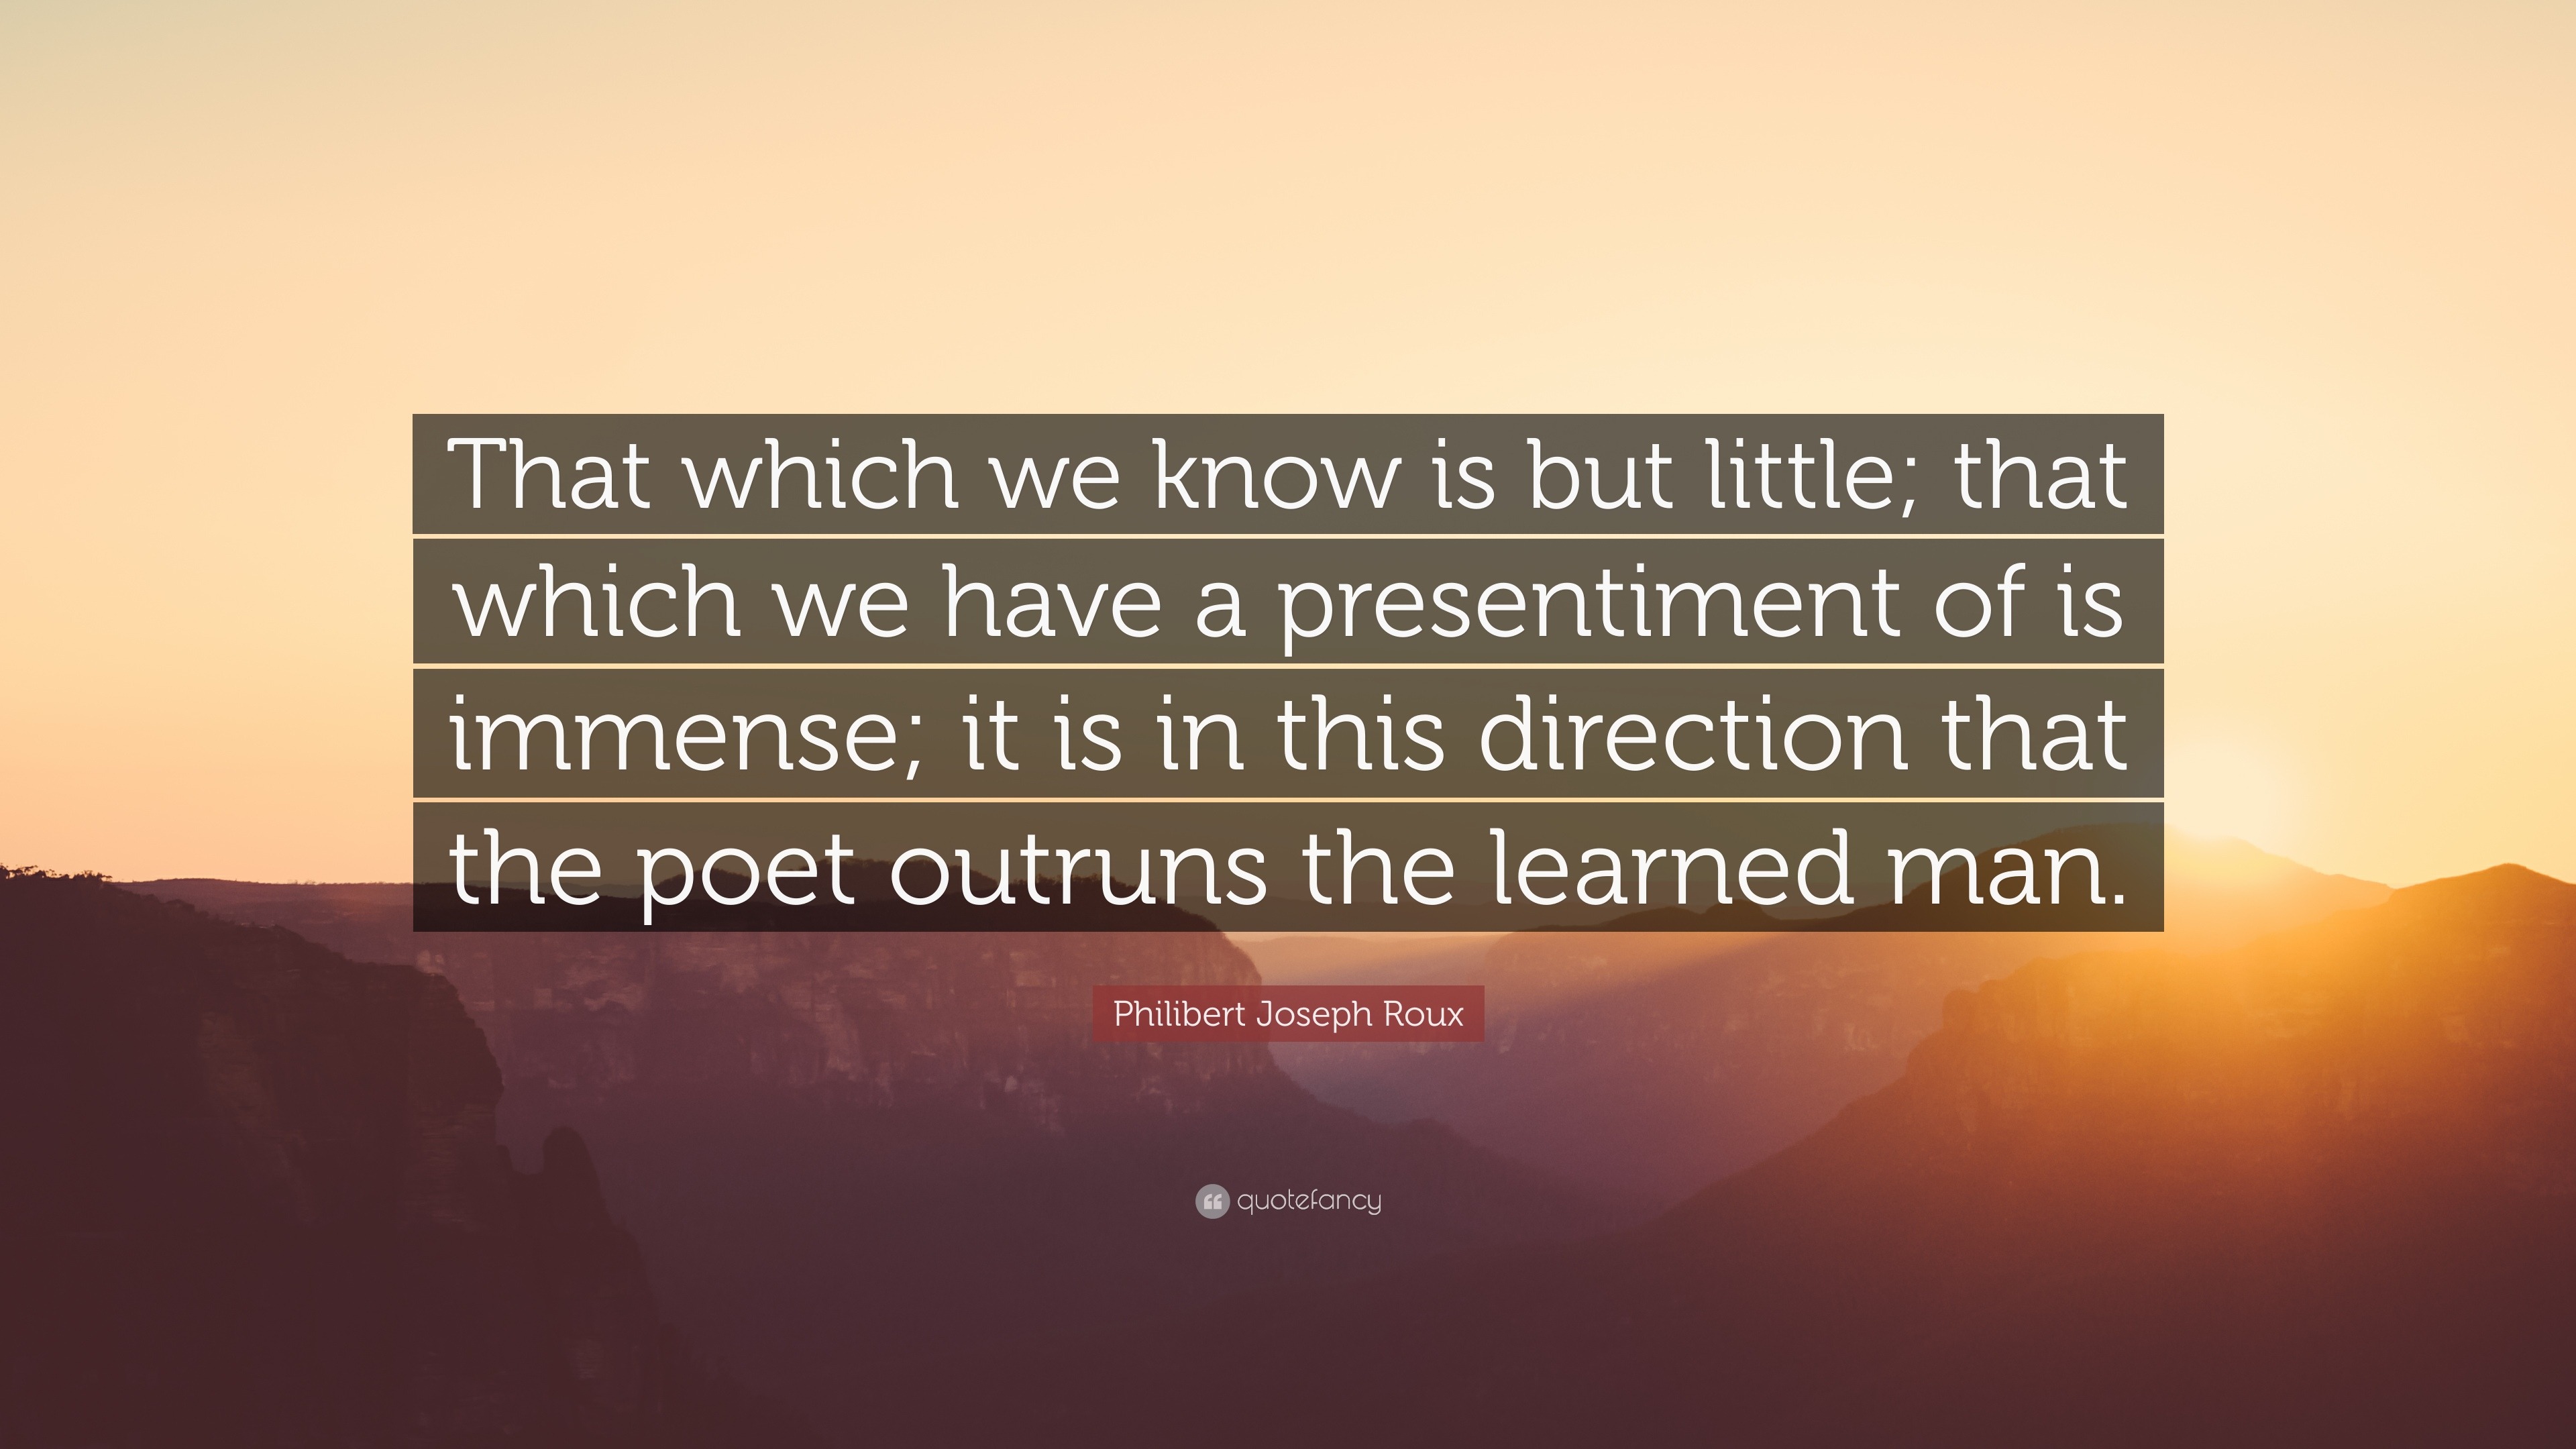 Philibert Joseph Roux Quote: “That which we know is but little; that ...